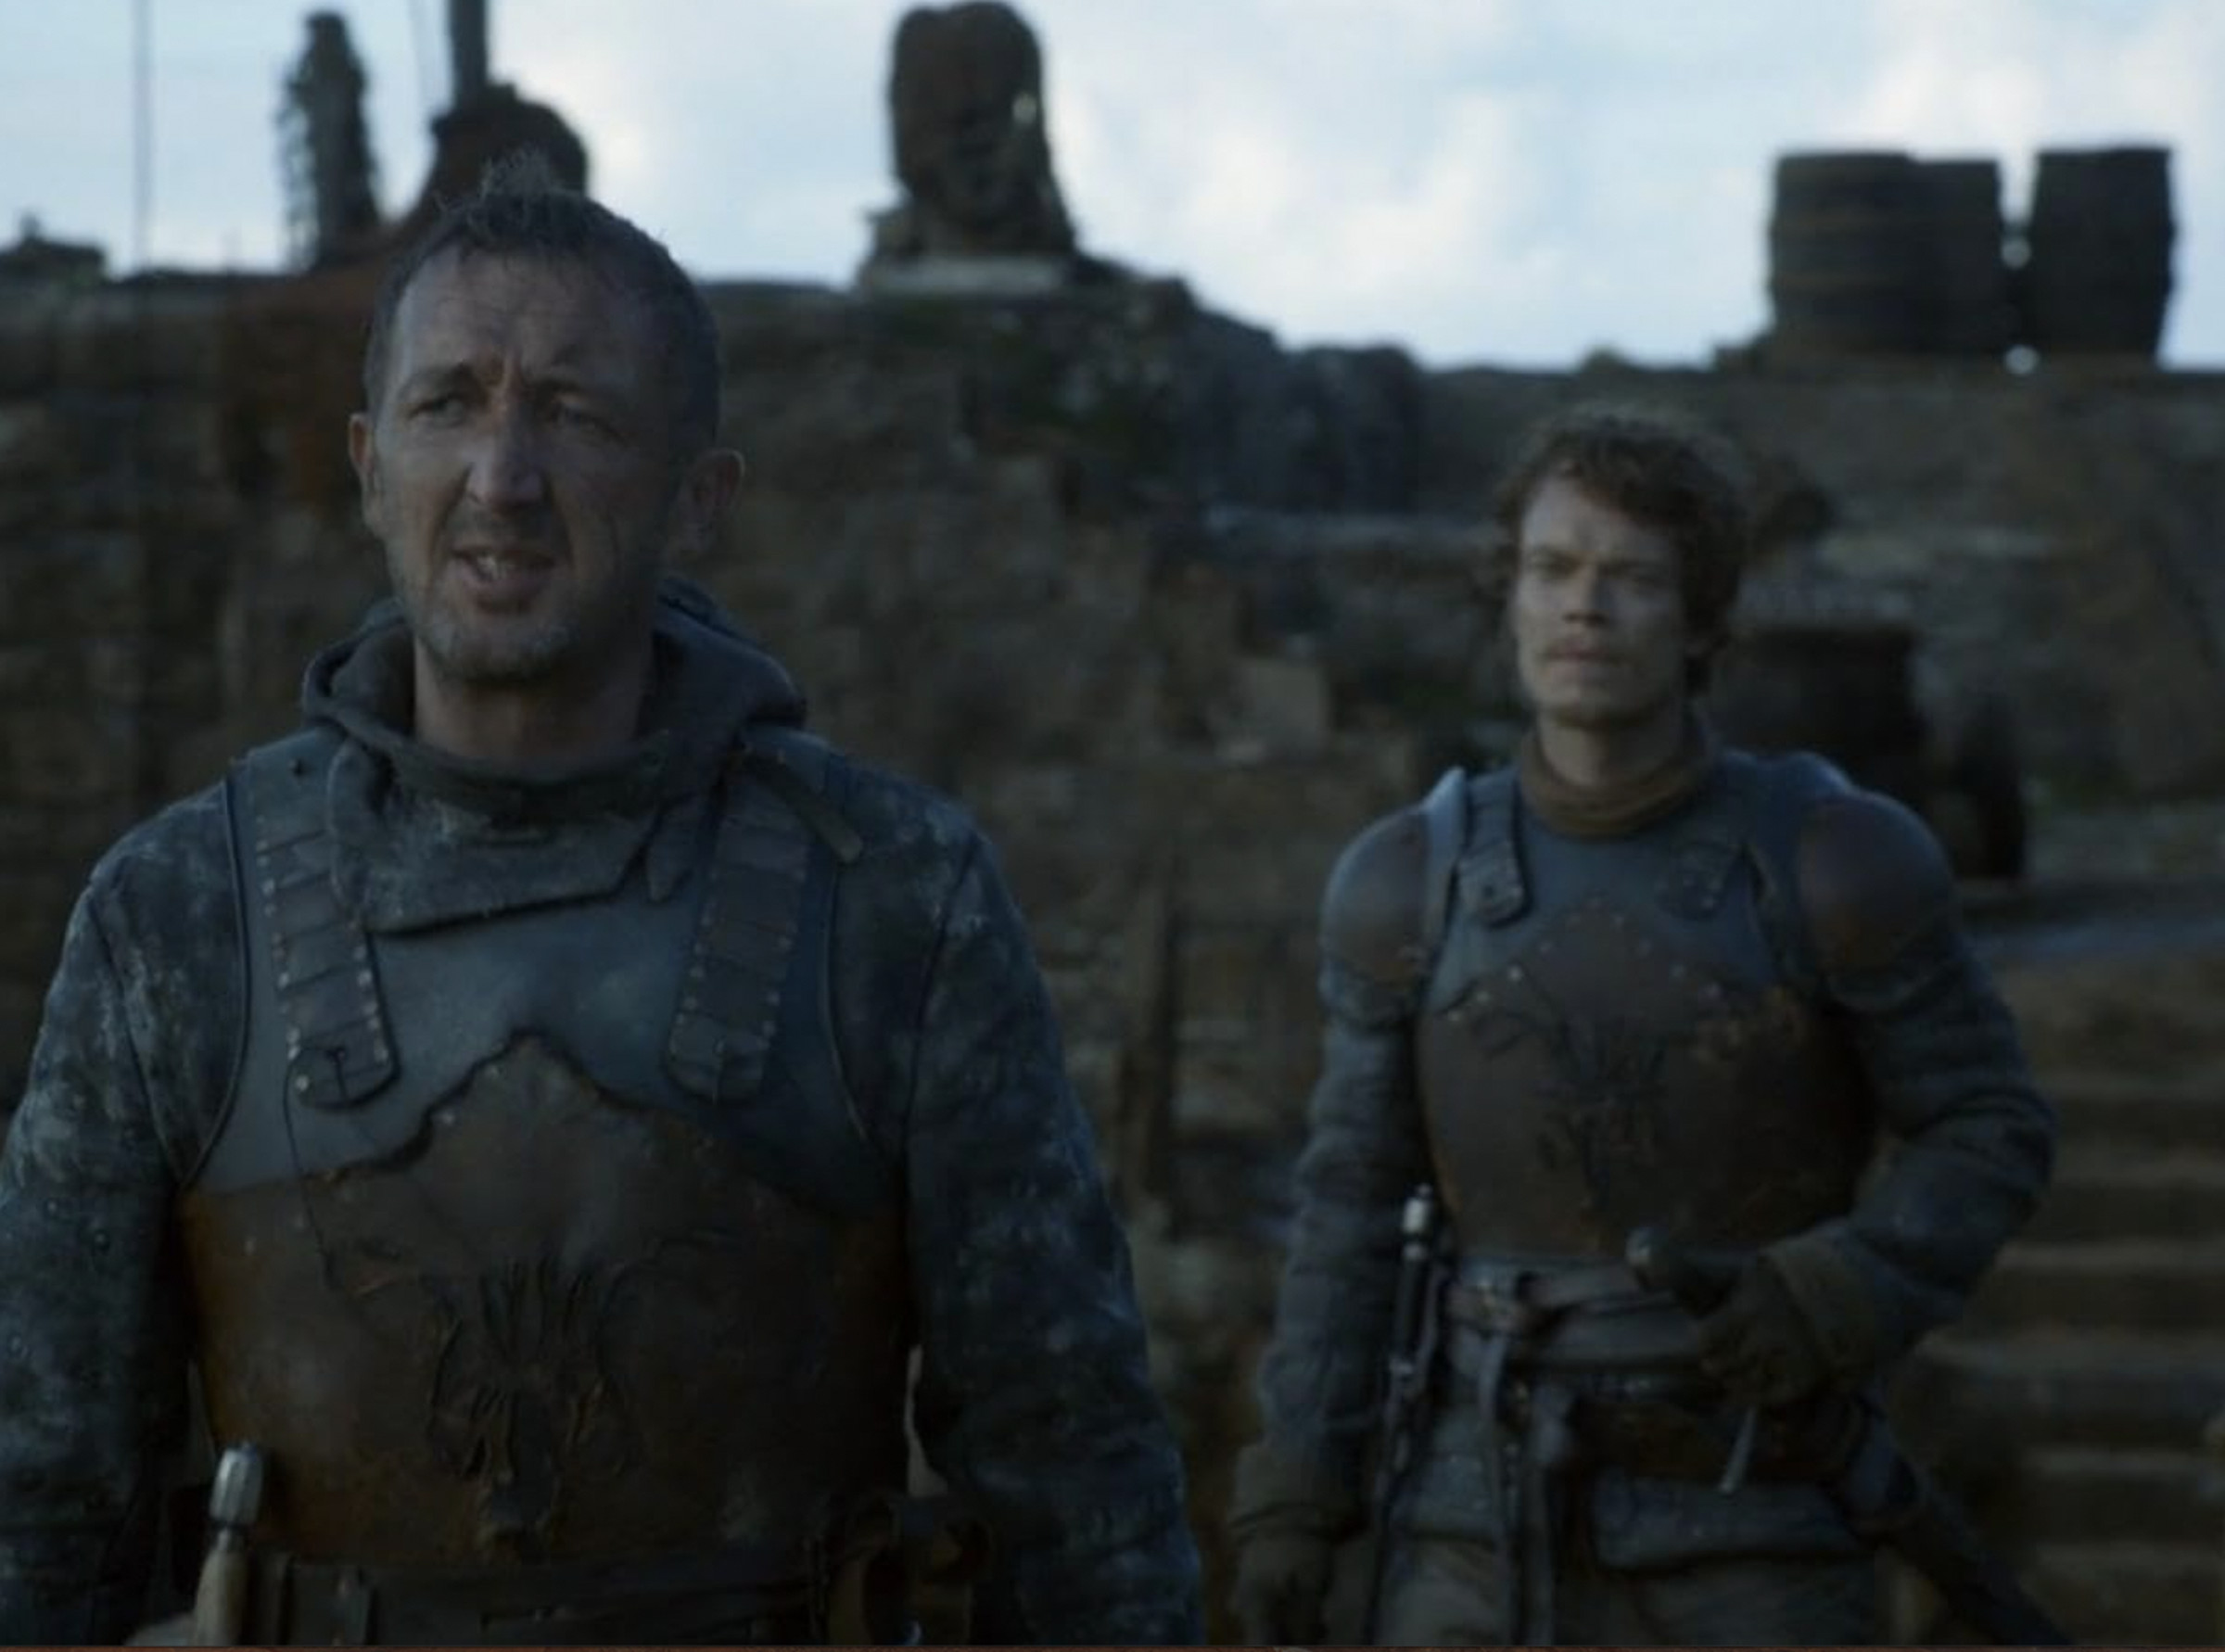 Screenshot from Game of Thrones featuring the actors Ralph Ineson and Alfrie Allen wearing armor